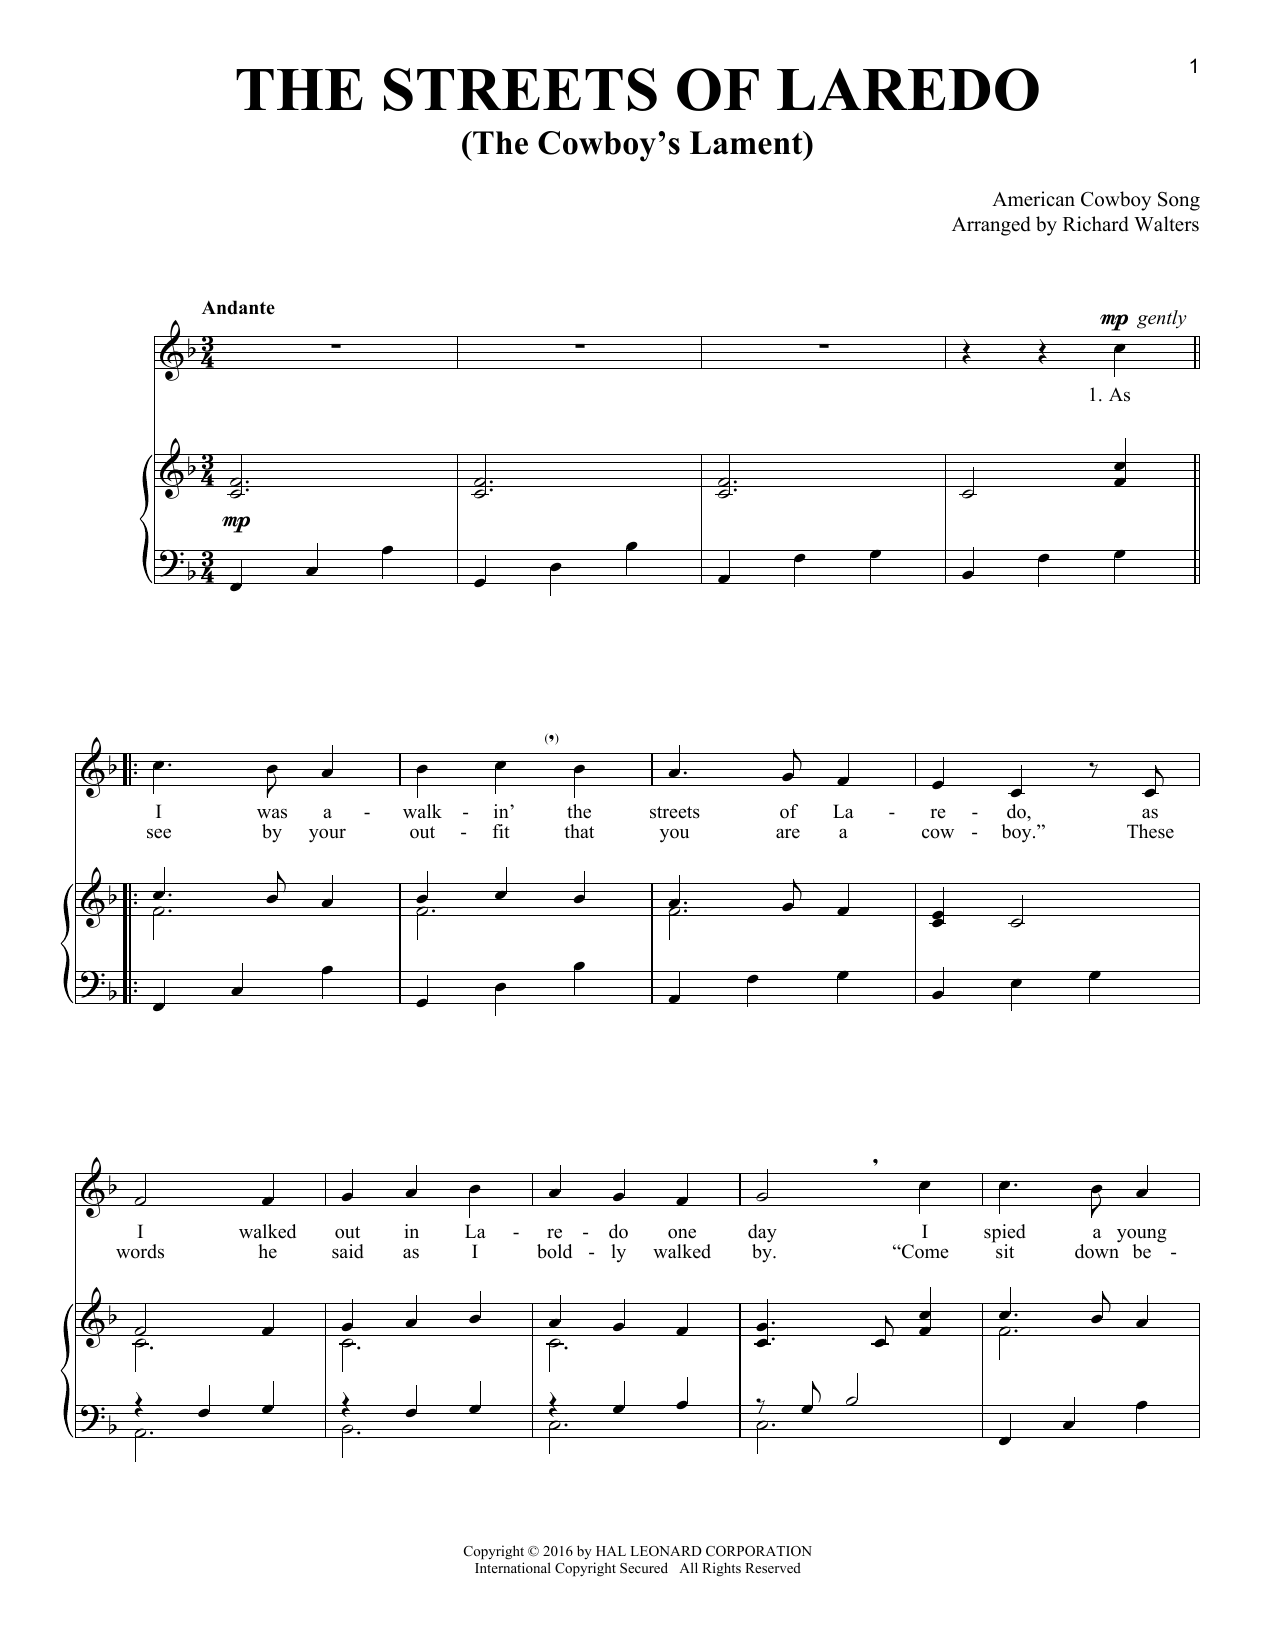 Download American Cowboy Song The Streets Of Laredo Sheet Music